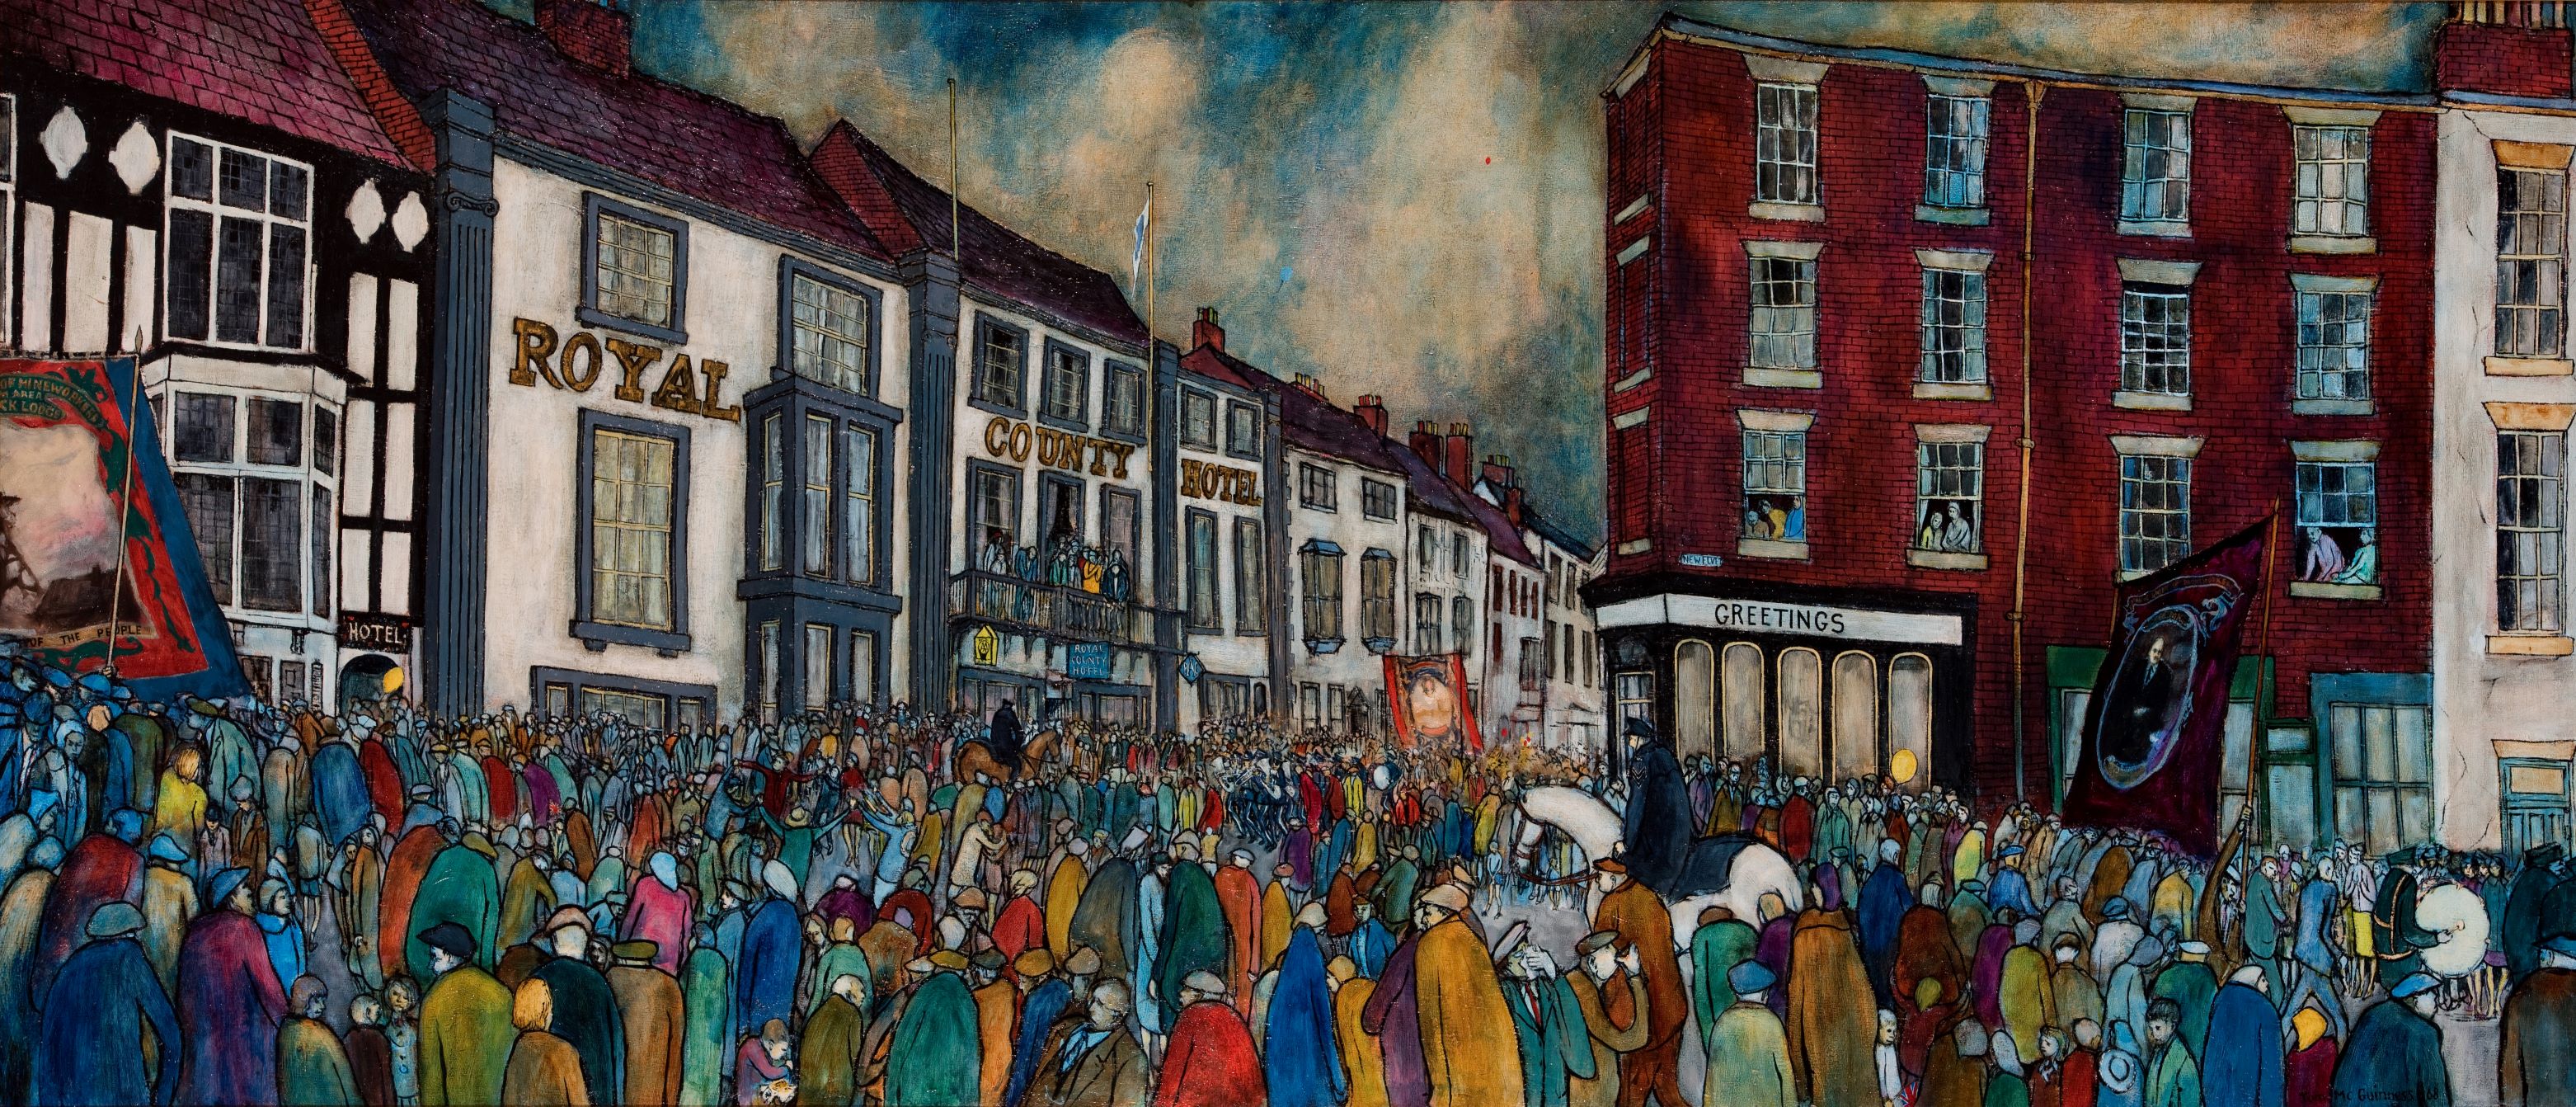 Durham's mining history celebrated in new art exhibition ahead of the